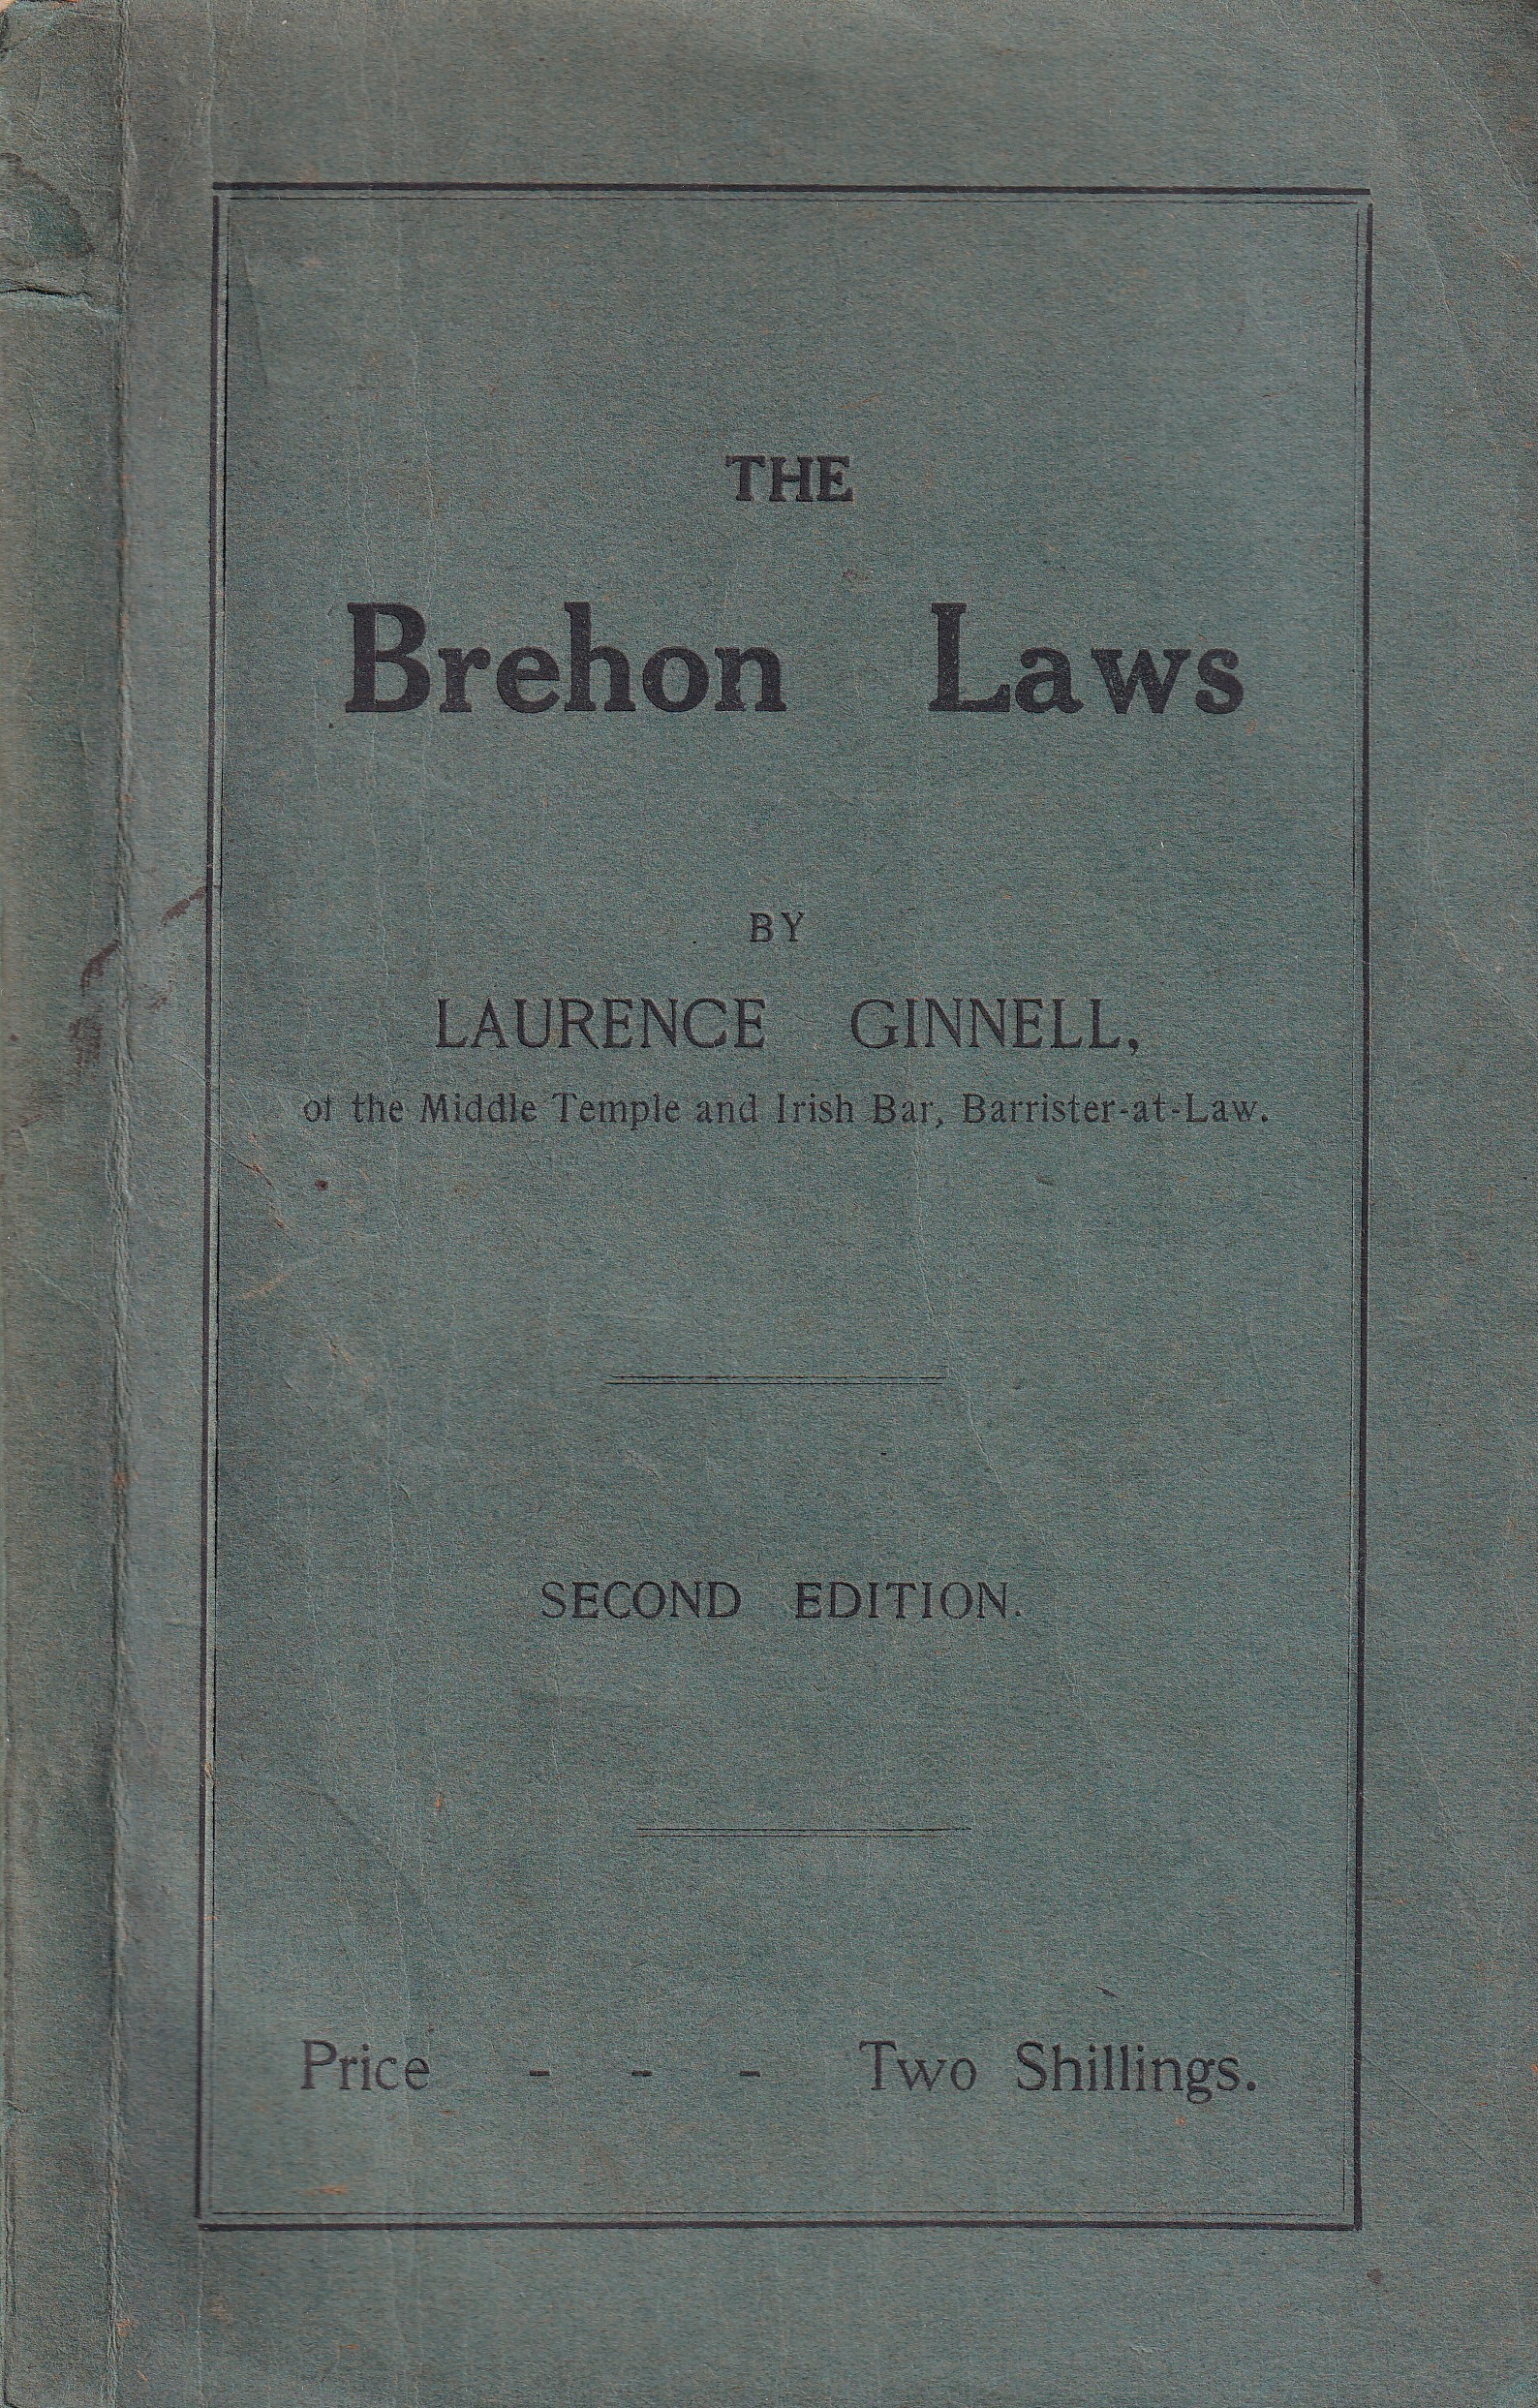 The Brehon Laws: A Legal Handbook | Laurence Ginnell | Charlie Byrne's